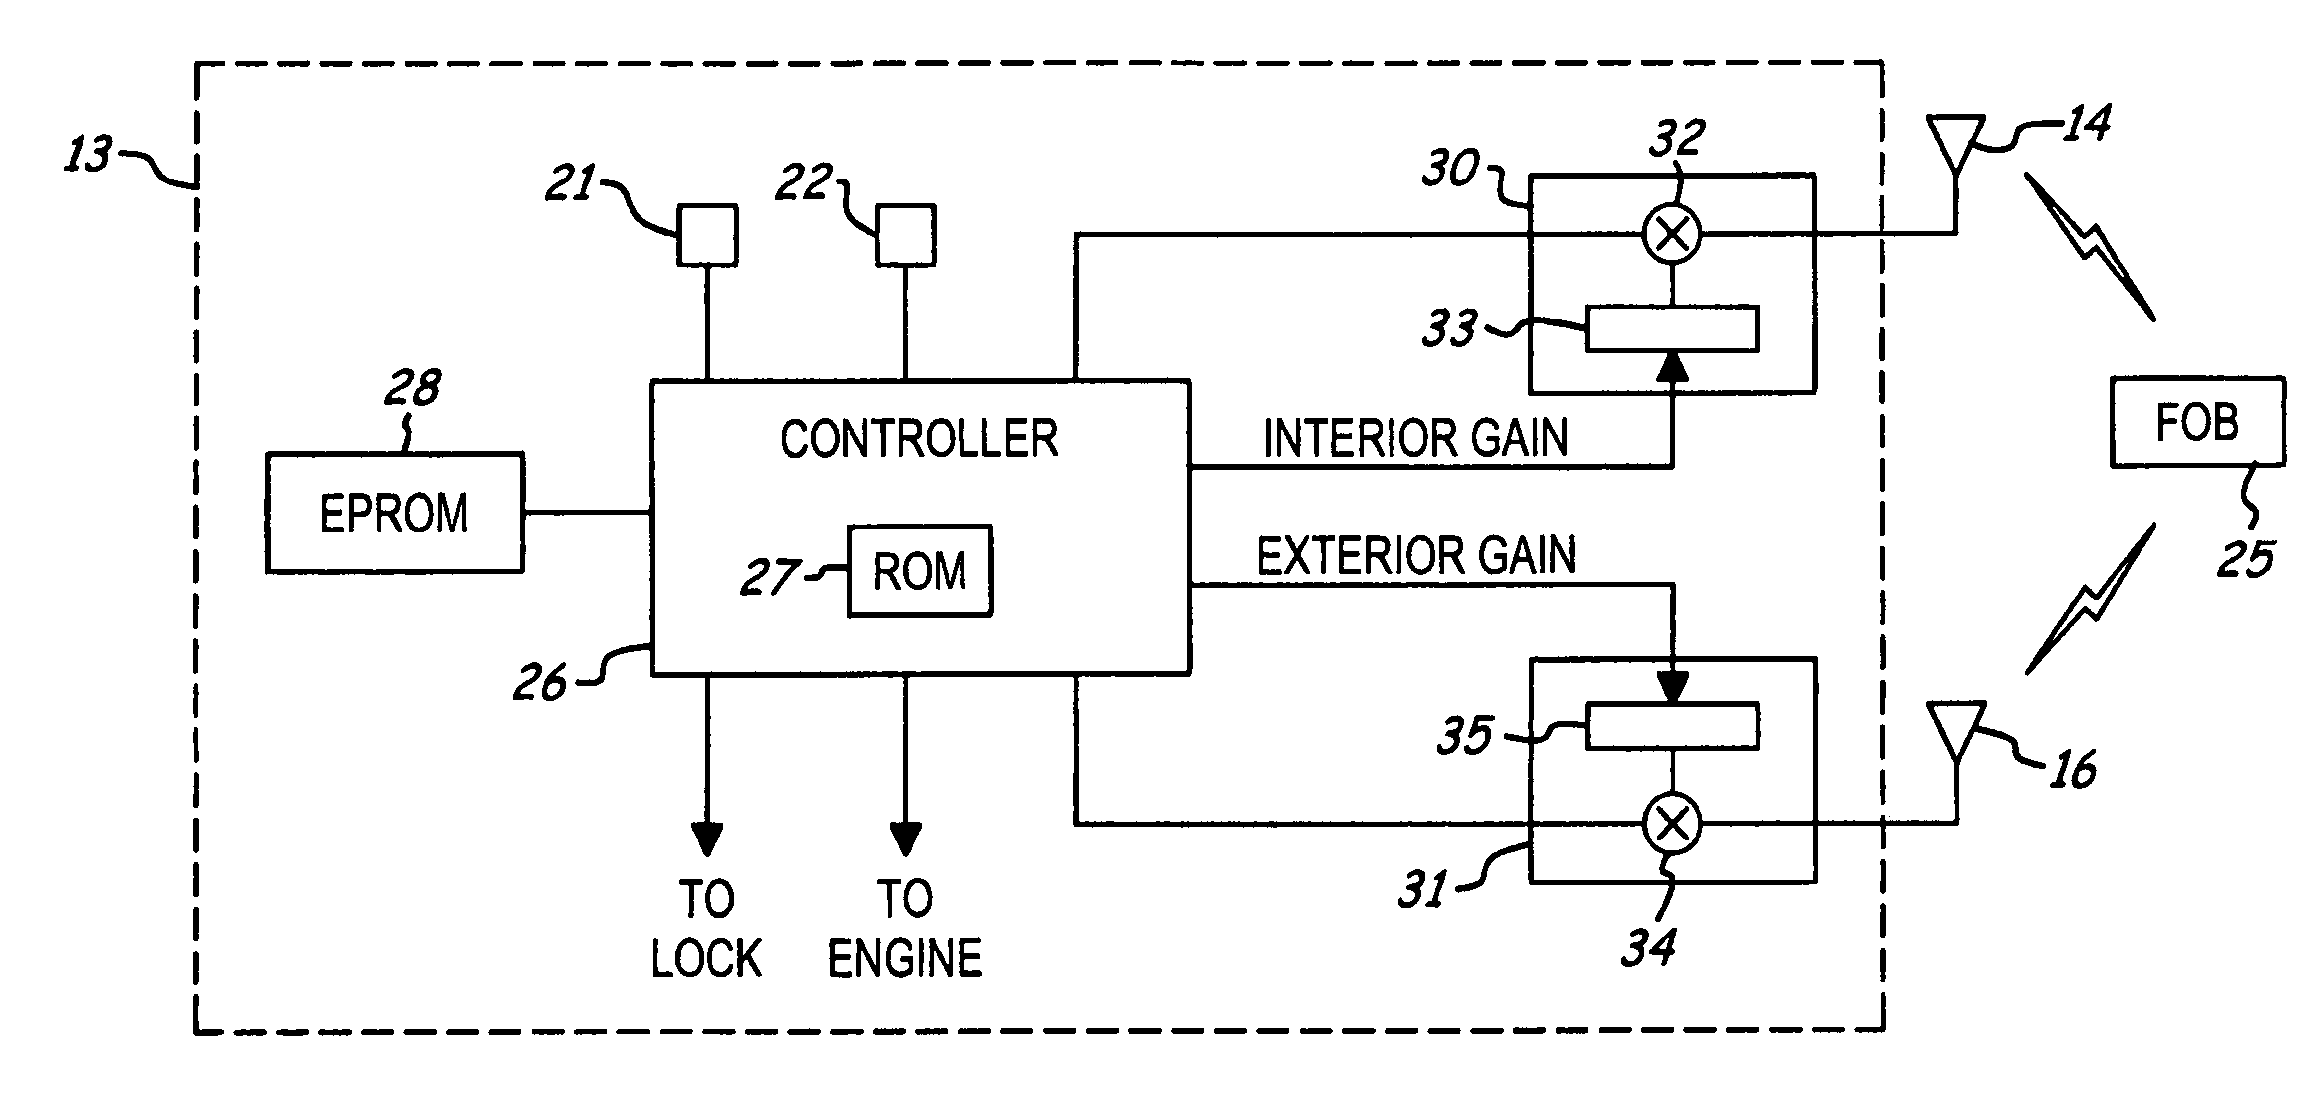 Vehicle independent passive entry system